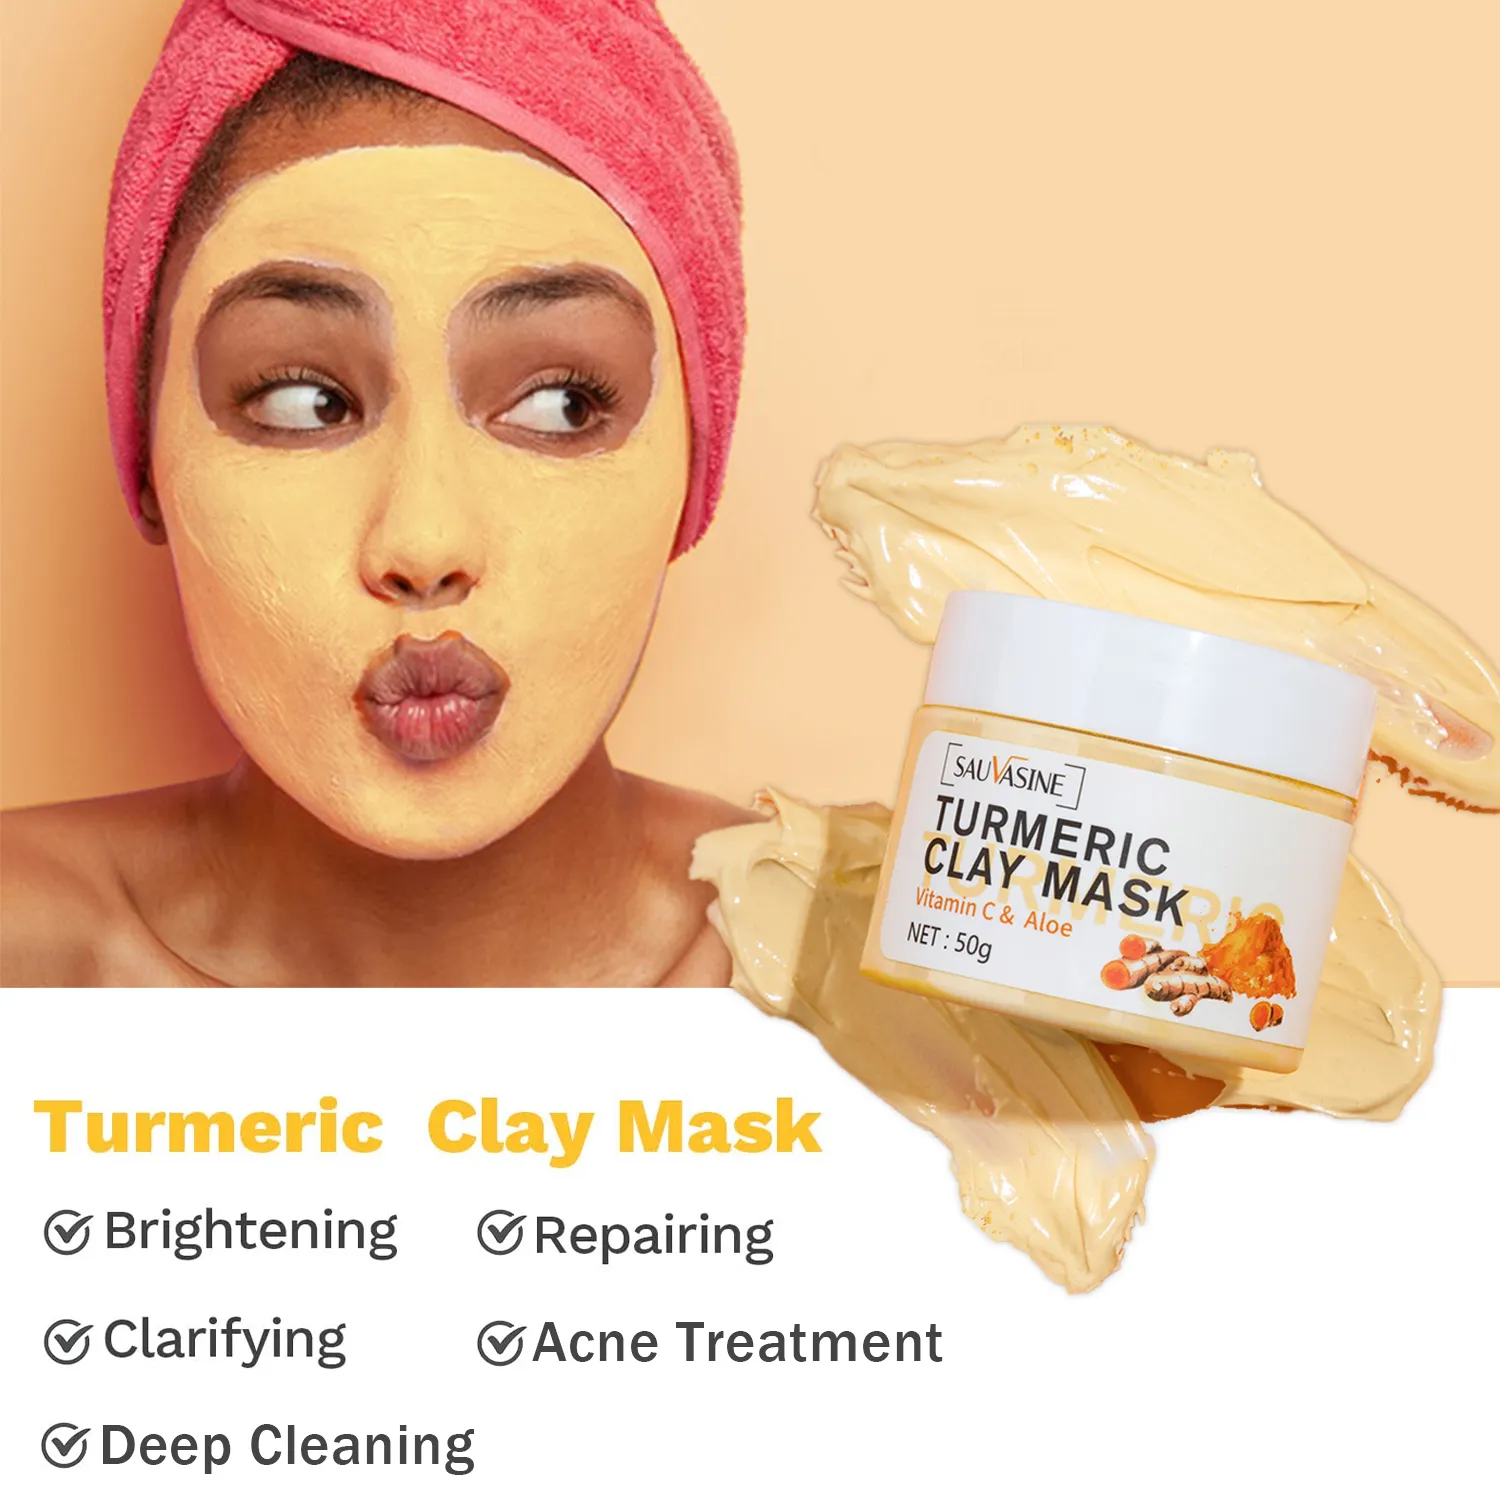 Professional Turmeric Mud Clay Face Mask Whitening Vitamin C Acne Treatment Dark Spots Remover Deep Cleaning Brightening Cream 10pcs clay poker chips texas hold em baccarat clay coins includes iron sheet professional casino european poker chips